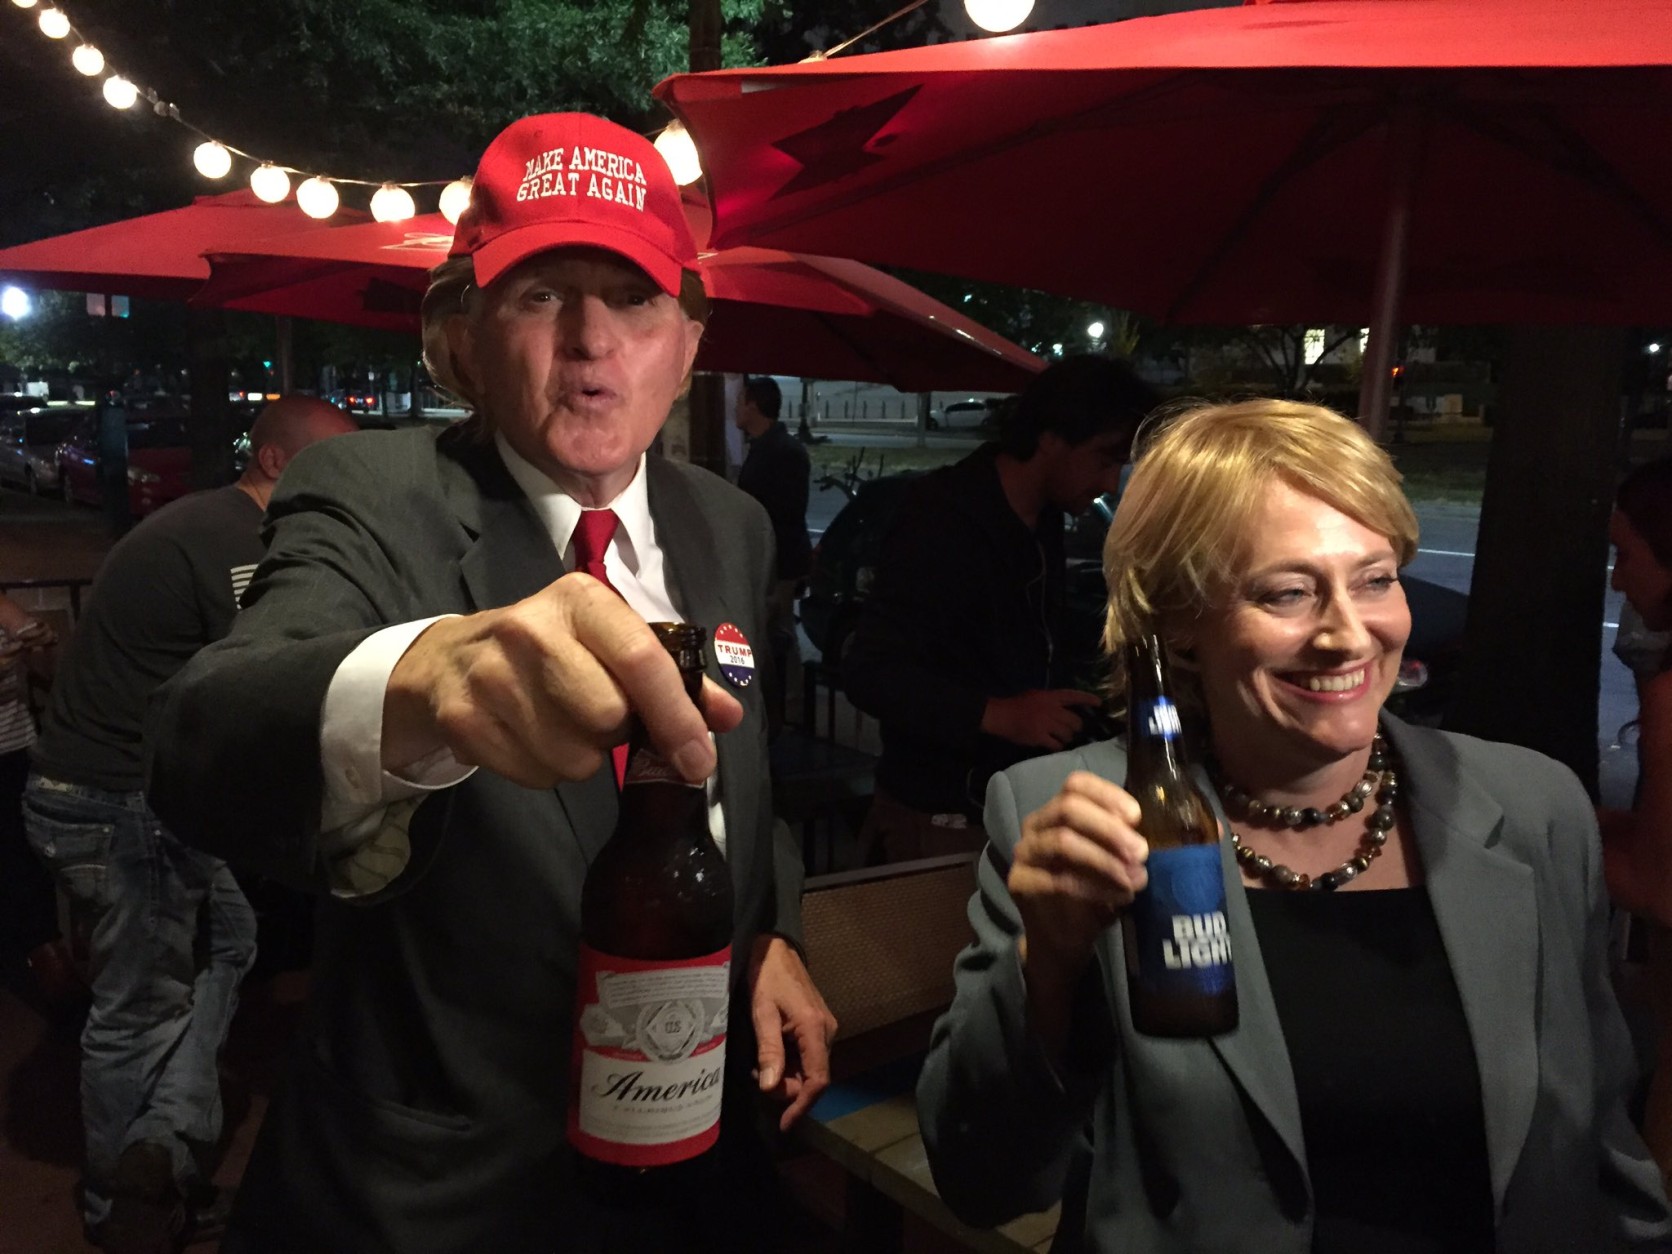 "Hillary" and "Trump" outside Capitol Lounge in D.C. "Trump" told WTOP's Michelle Basch, "This Bud's for you." (WTOP/Michelle Basch)